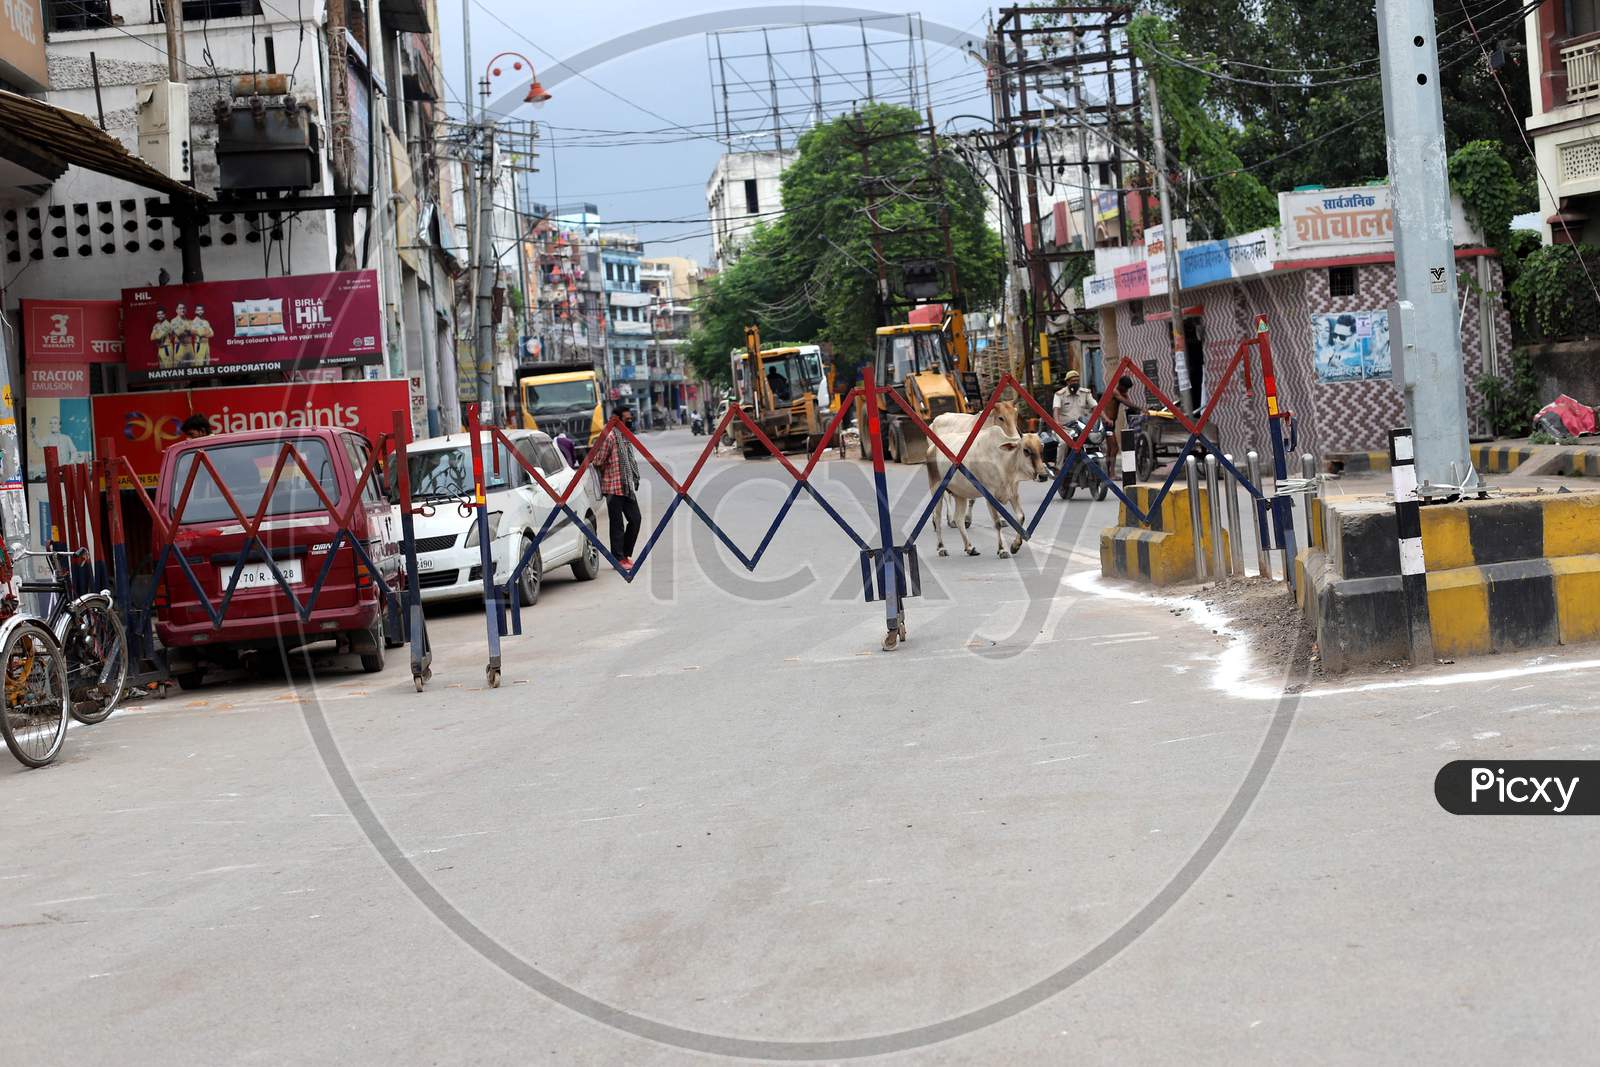 A view of a closed street on the occasion of Eid Al- Adha during the outbreak of the coronavirus disease (COVID-19) in Prayagraj, August 1, 2020.